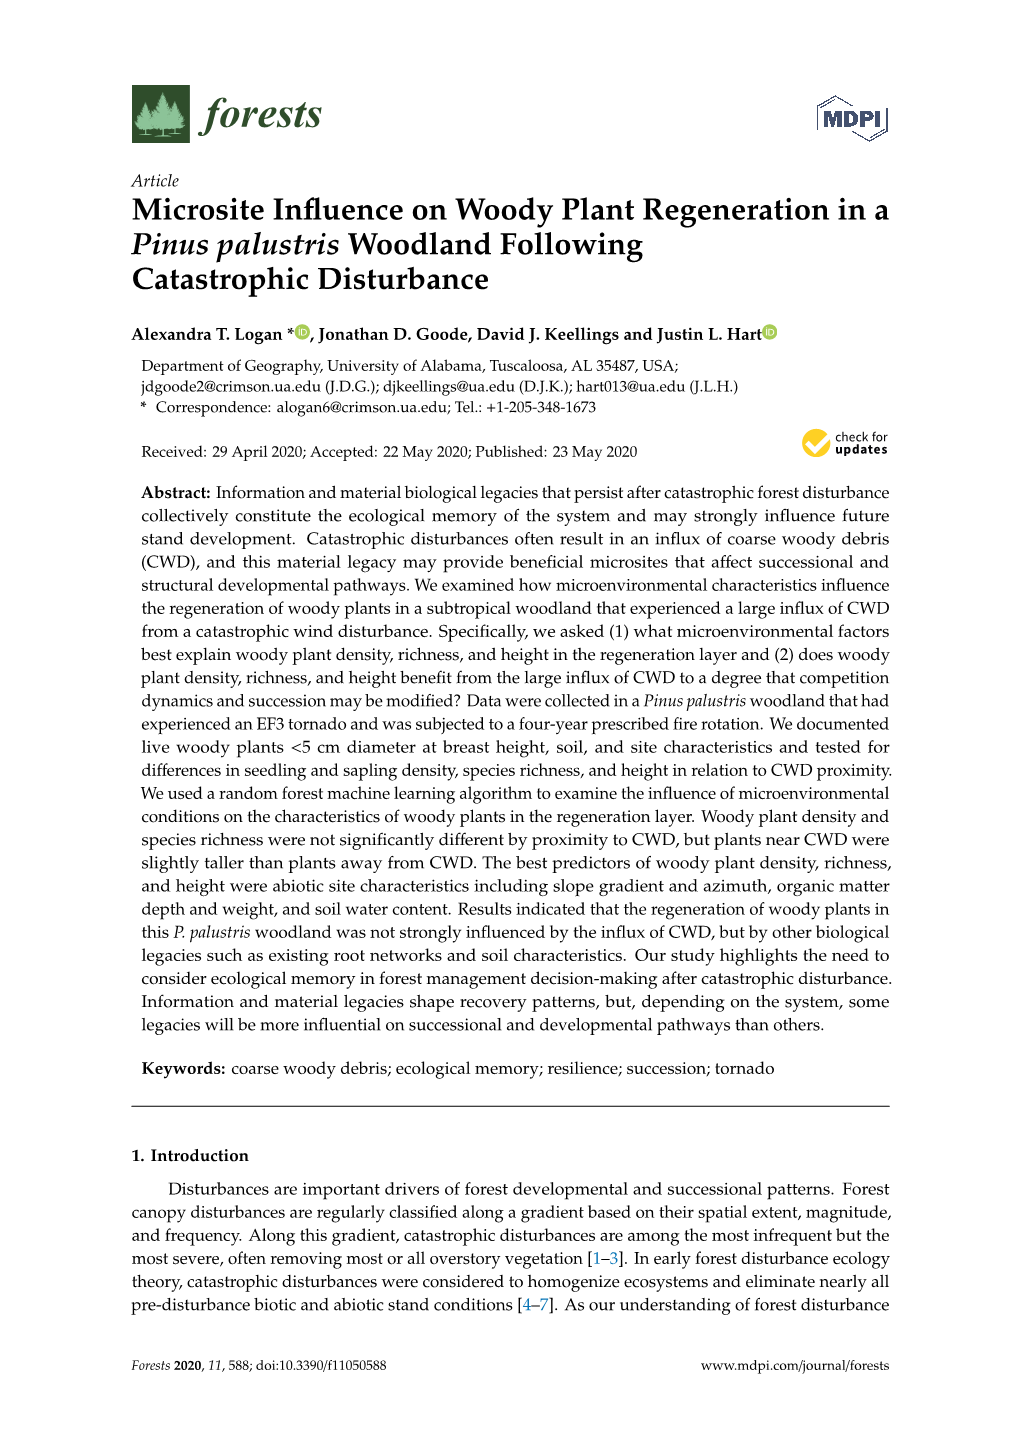 Microsite Influence on Woody Plant Regeneration in a Pinus Palustris